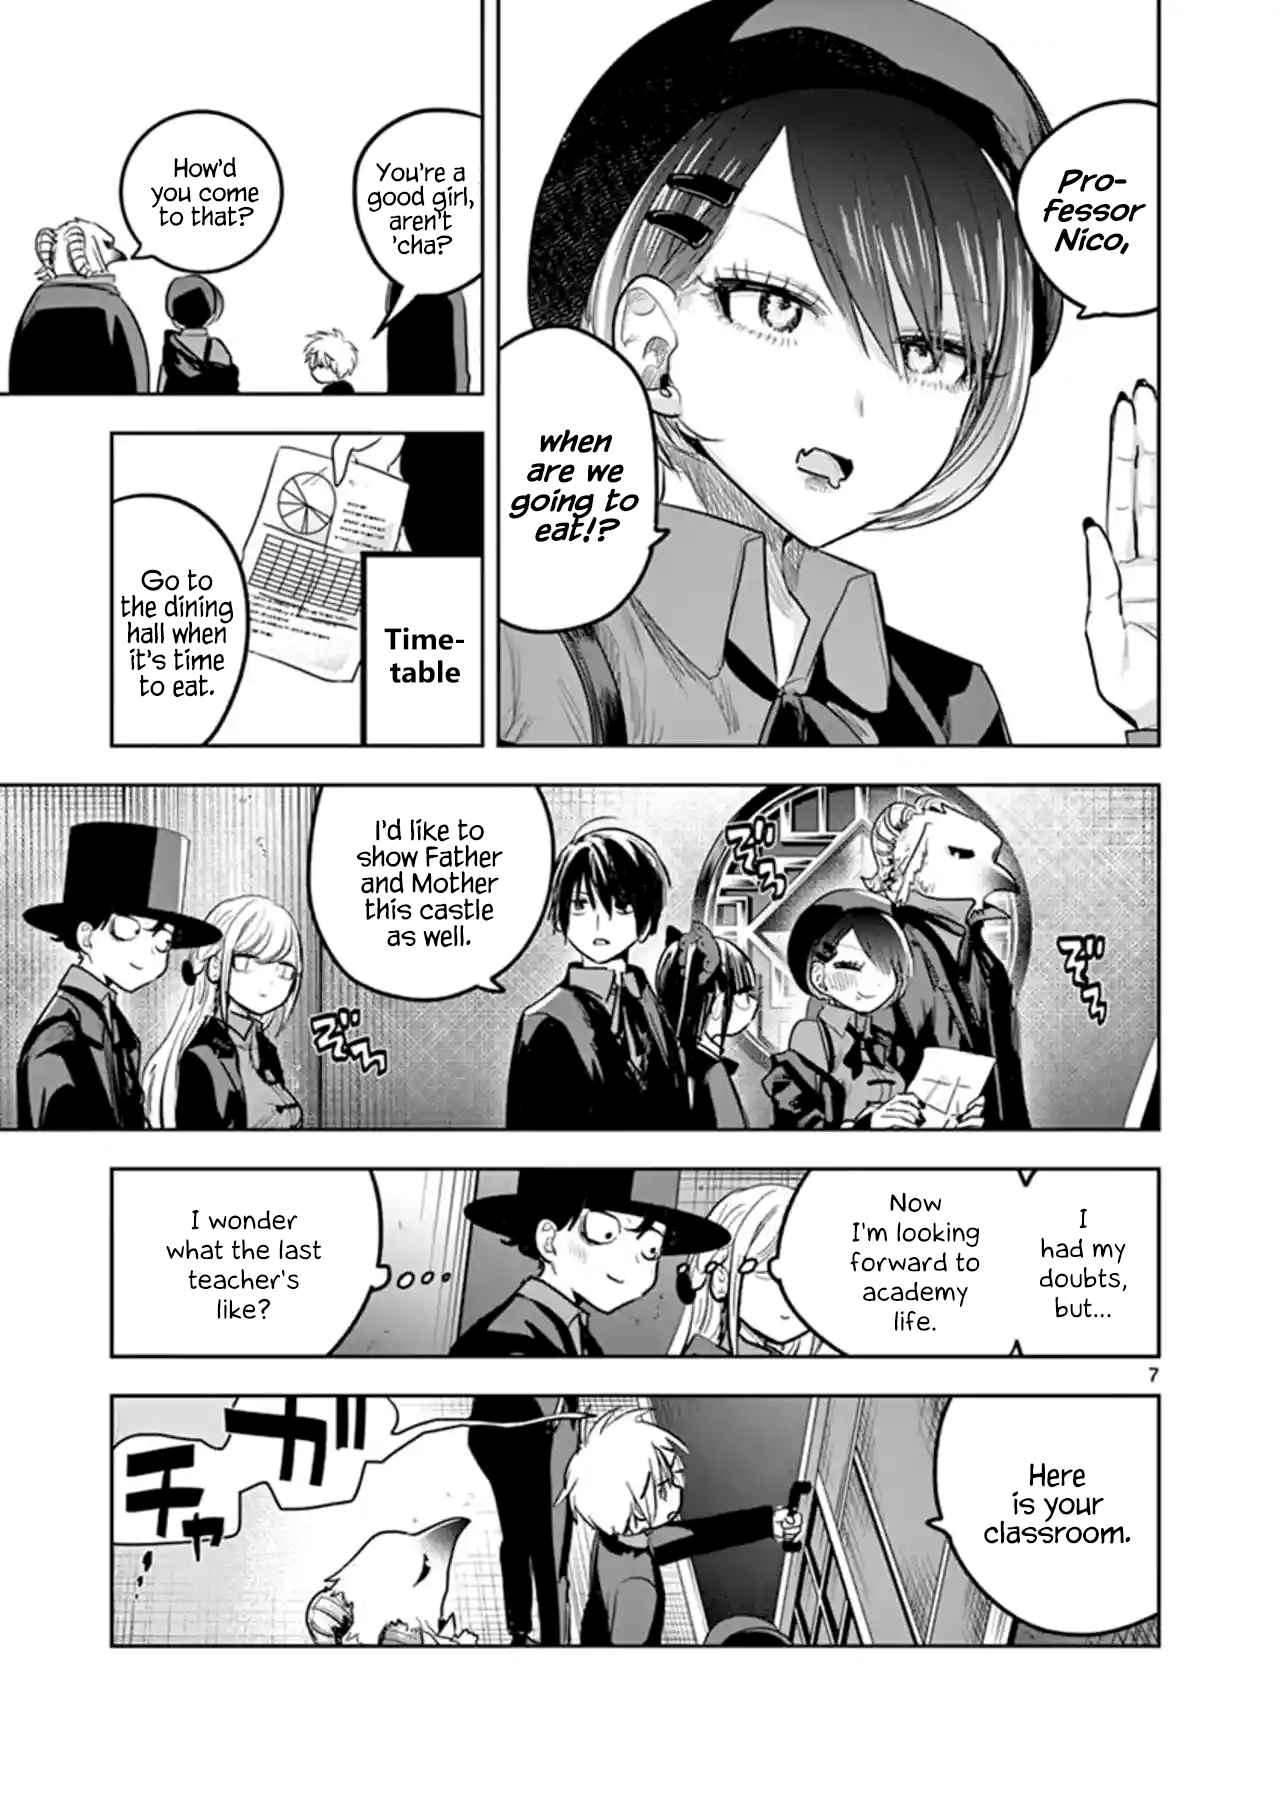 The Duke of Death and His Black Maid Vol. 9 Ch. 131 Orientation